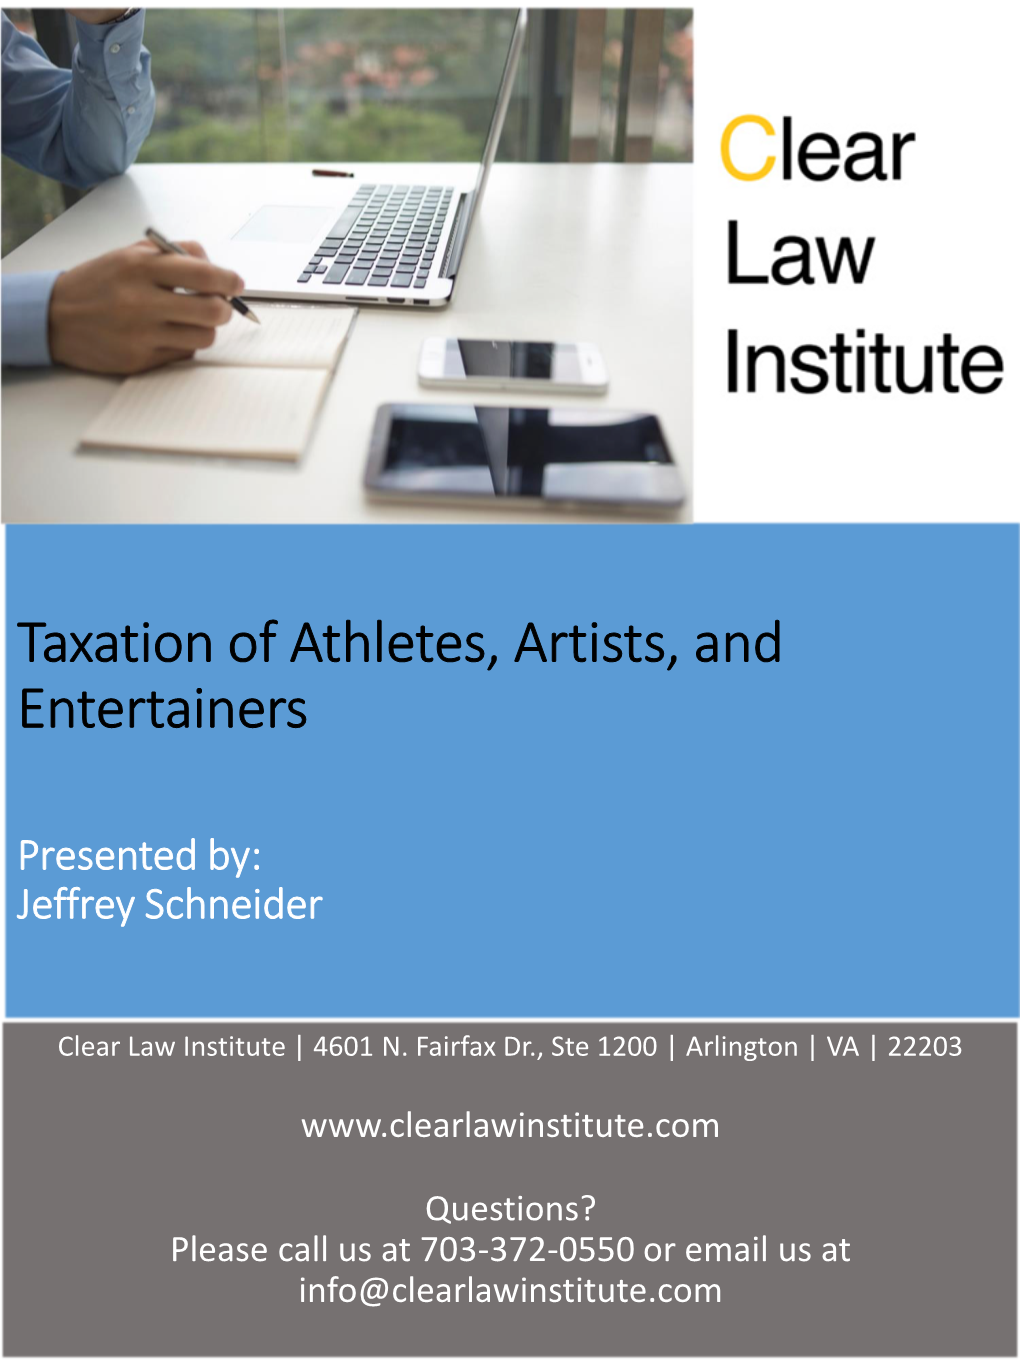 Taxation of Athletes, Artists, and Entertainers